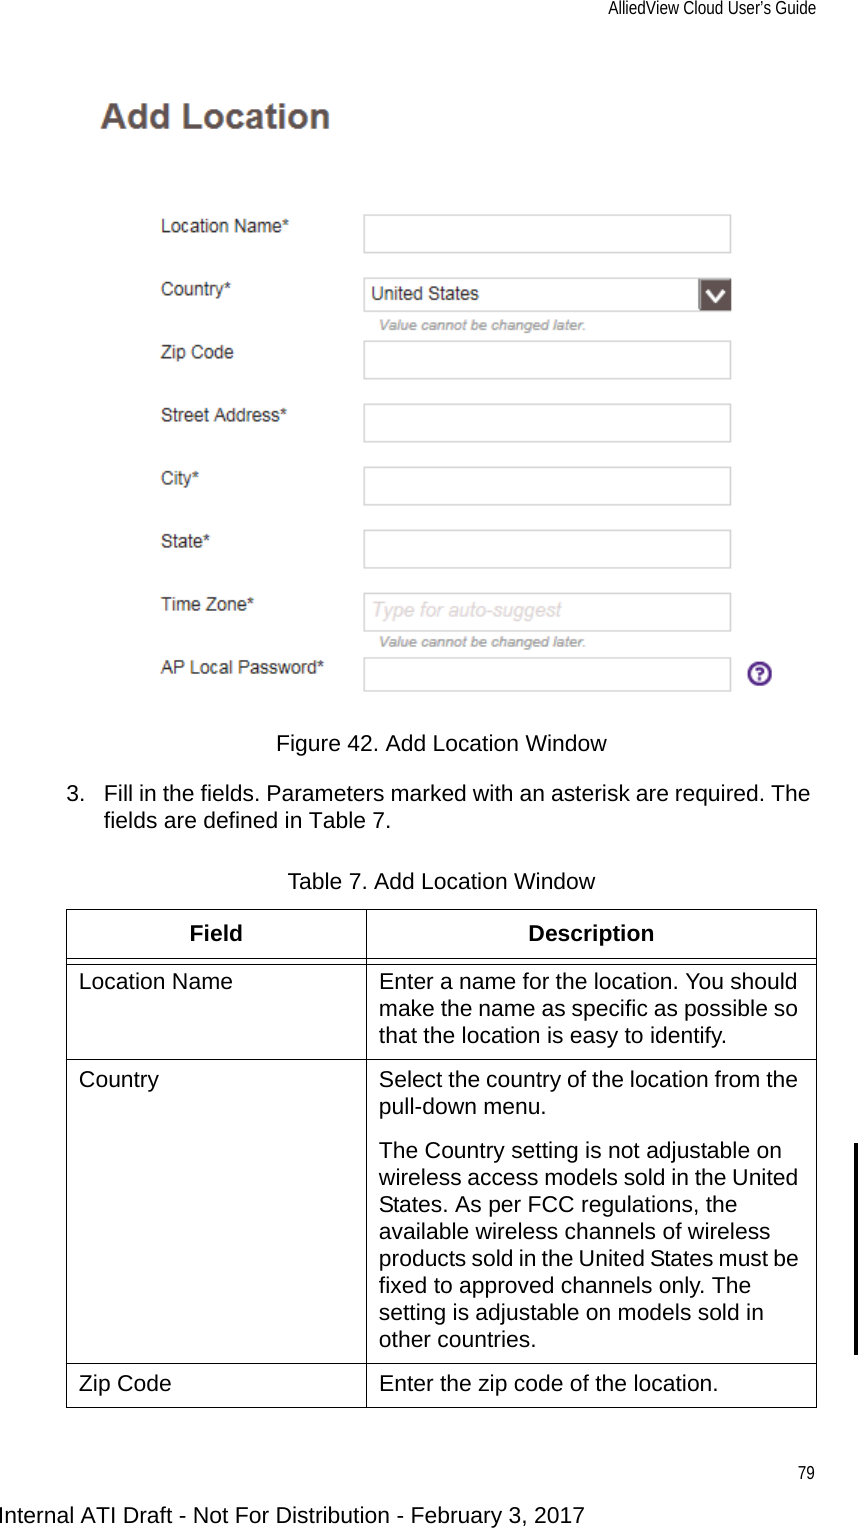 AlliedView Cloud User’s Guide79Figure 42. Add Location Window3. Fill in the fields. Parameters marked with an asterisk are required. The fields are defined in Table 7.Table 7. Add Location WindowField DescriptionLocation Name Enter a name for the location. You should make the name as specific as possible so that the location is easy to identify.Country Select the country of the location from the pull-down menu.The Country setting is not adjustable on wireless access models sold in the United States. As per FCC regulations, the available wireless channels of wireless products sold in the United States must be fixed to approved channels only. The setting is adjustable on models sold in other countries.Zip Code Enter the zip code of the location.Internal ATI Draft - Not For Distribution - February 3, 2017